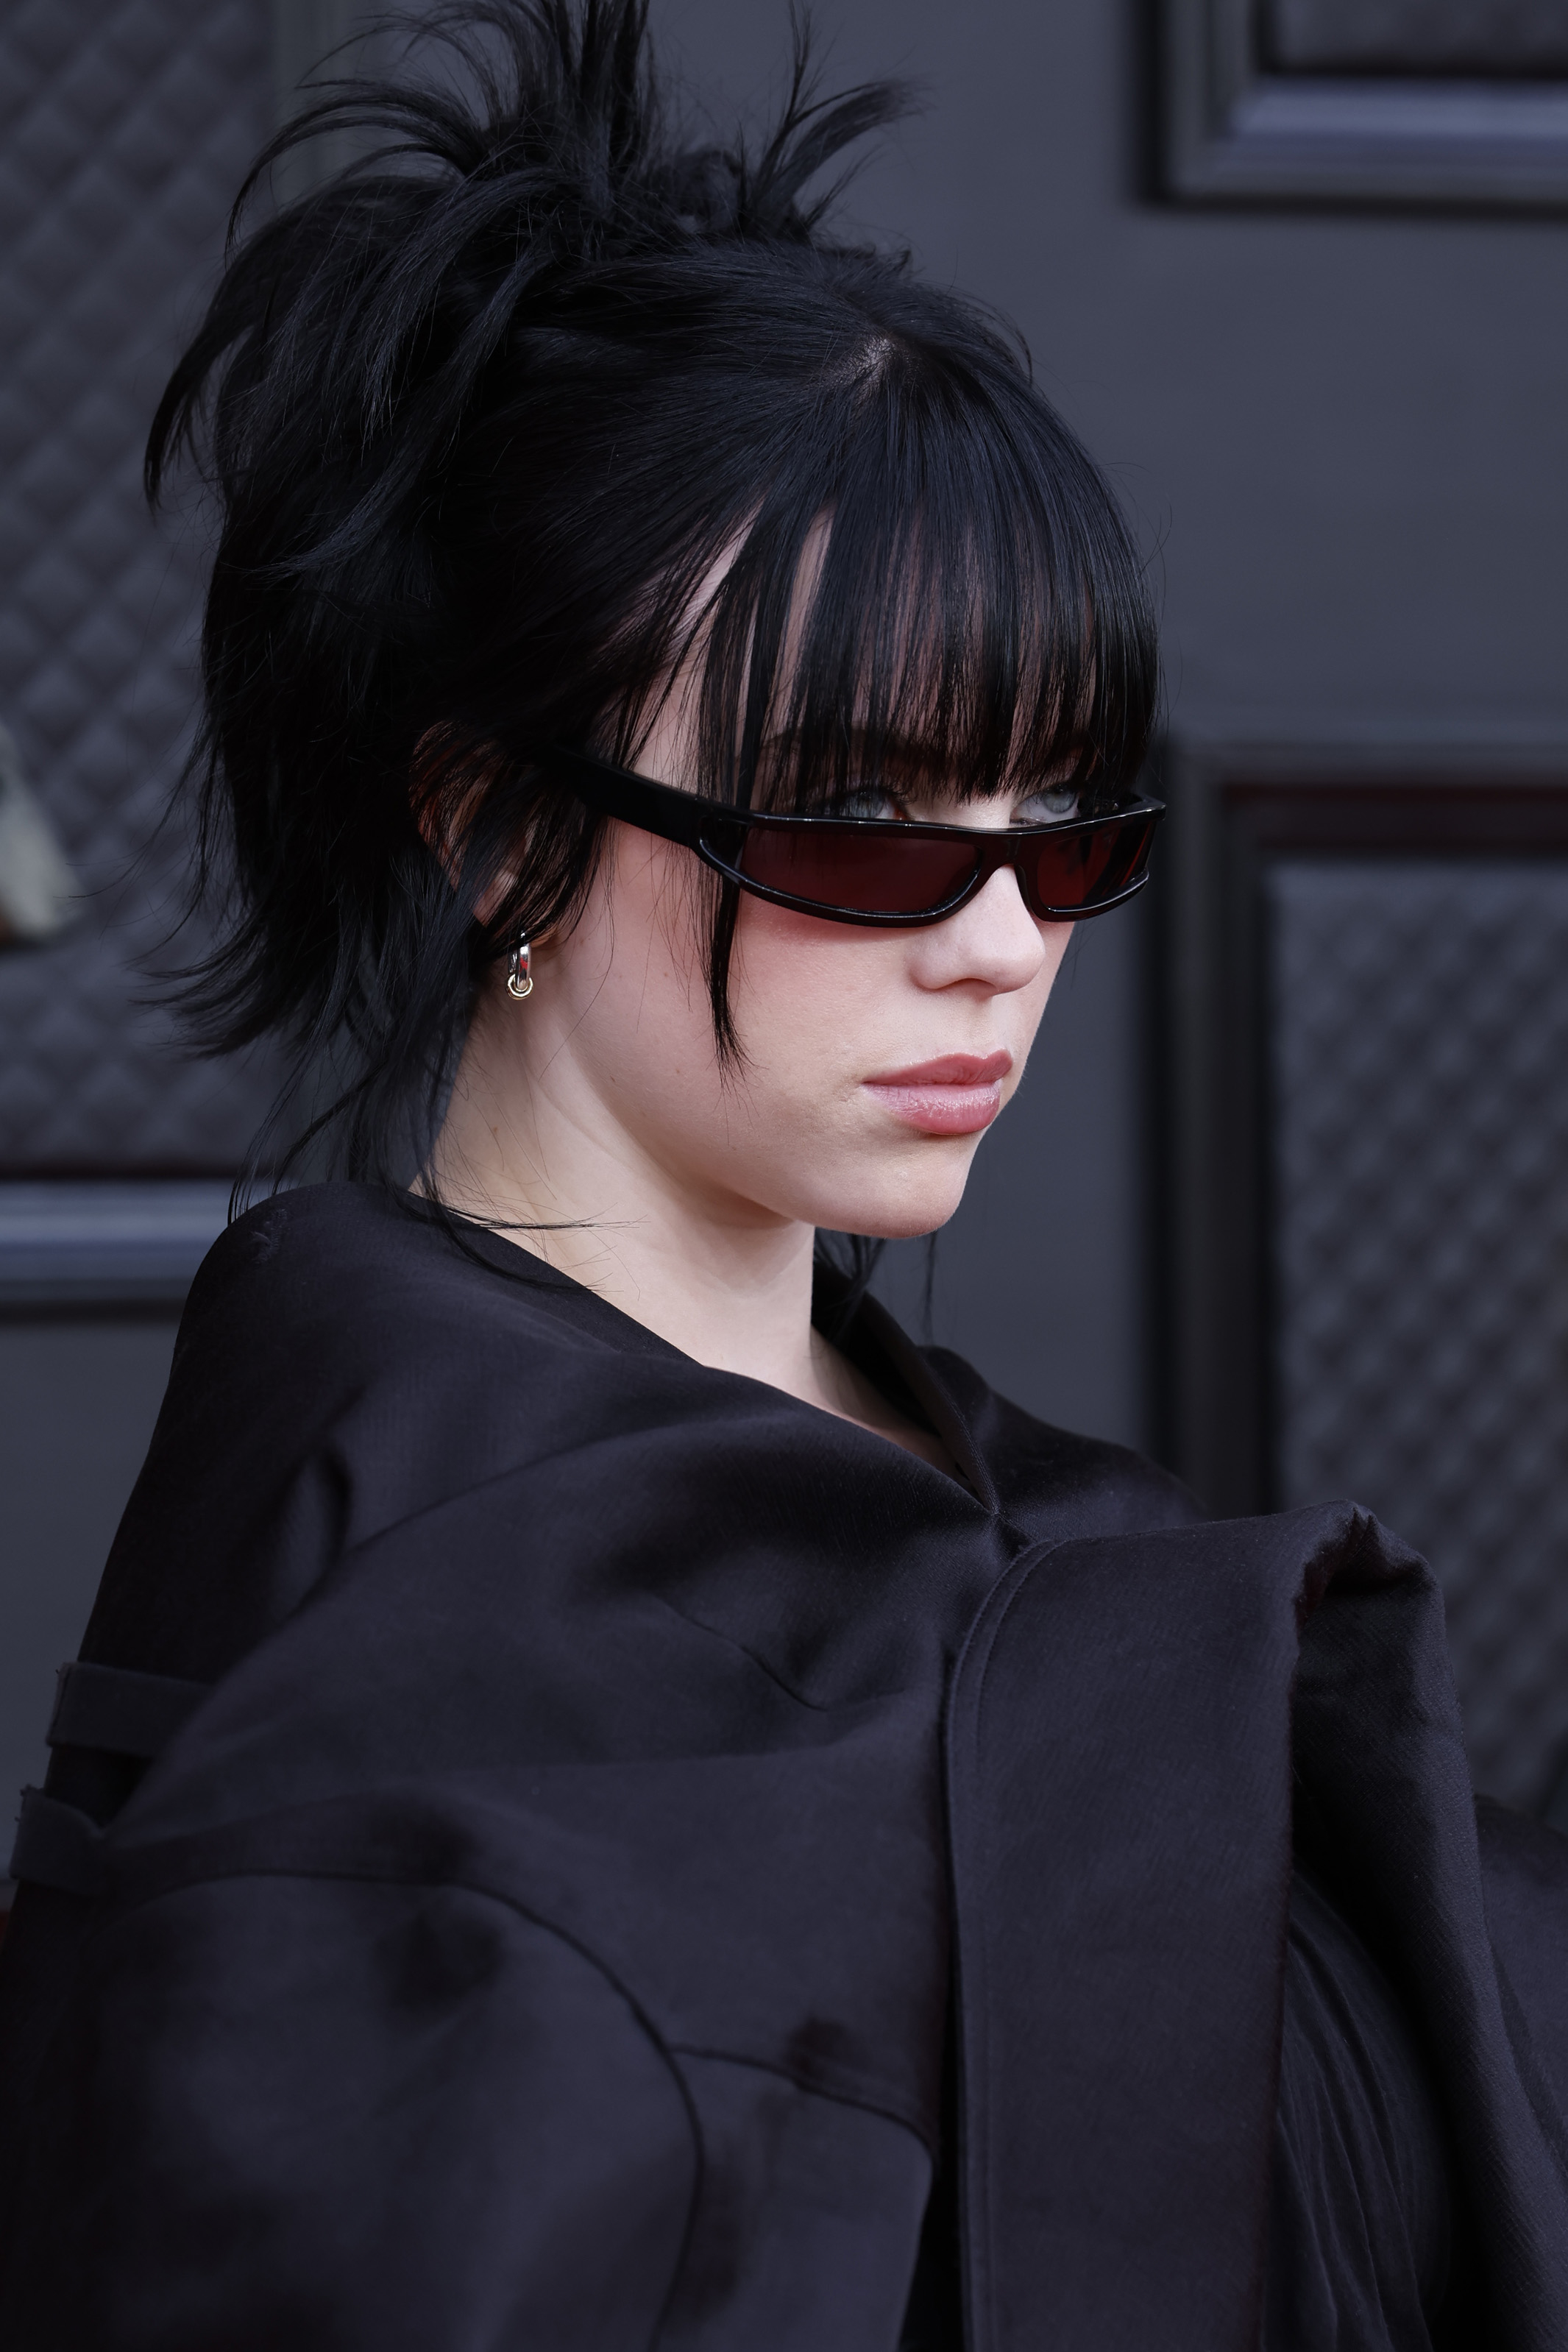 Close-up of Billie with dark hair at a media event and wearing sunglasses